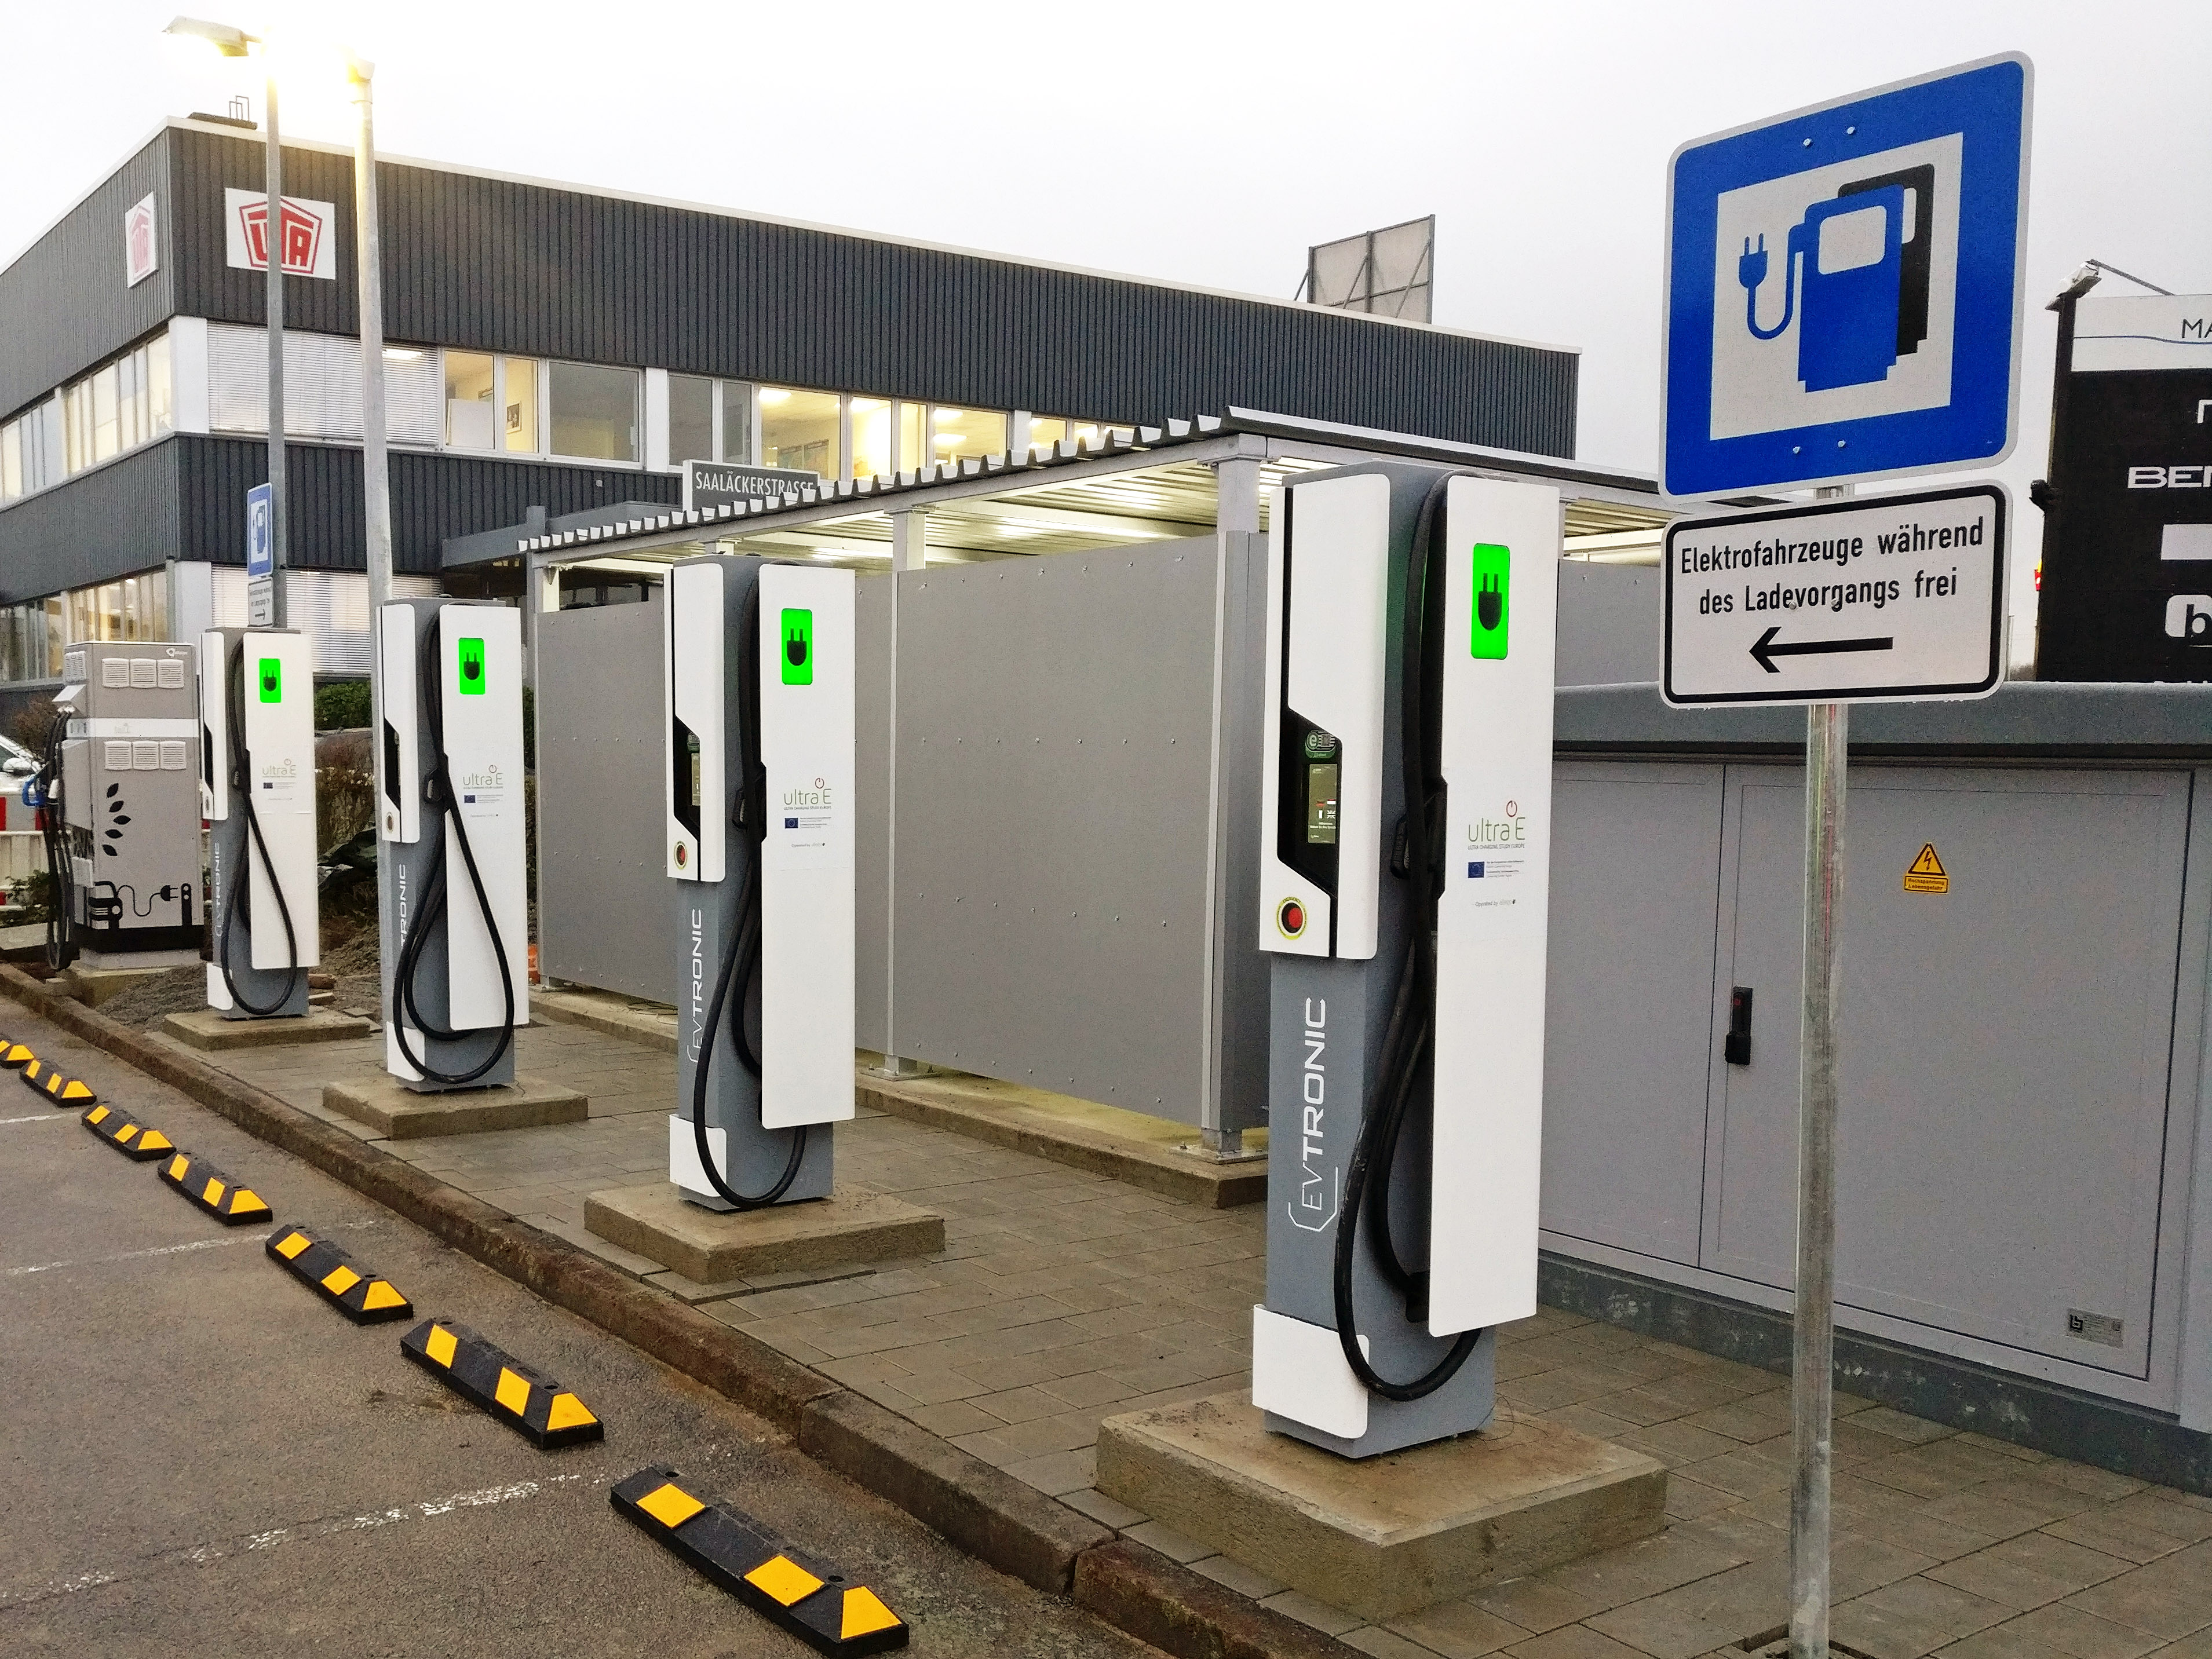 First 'ultrafast' electric car charging station comes online in Europe